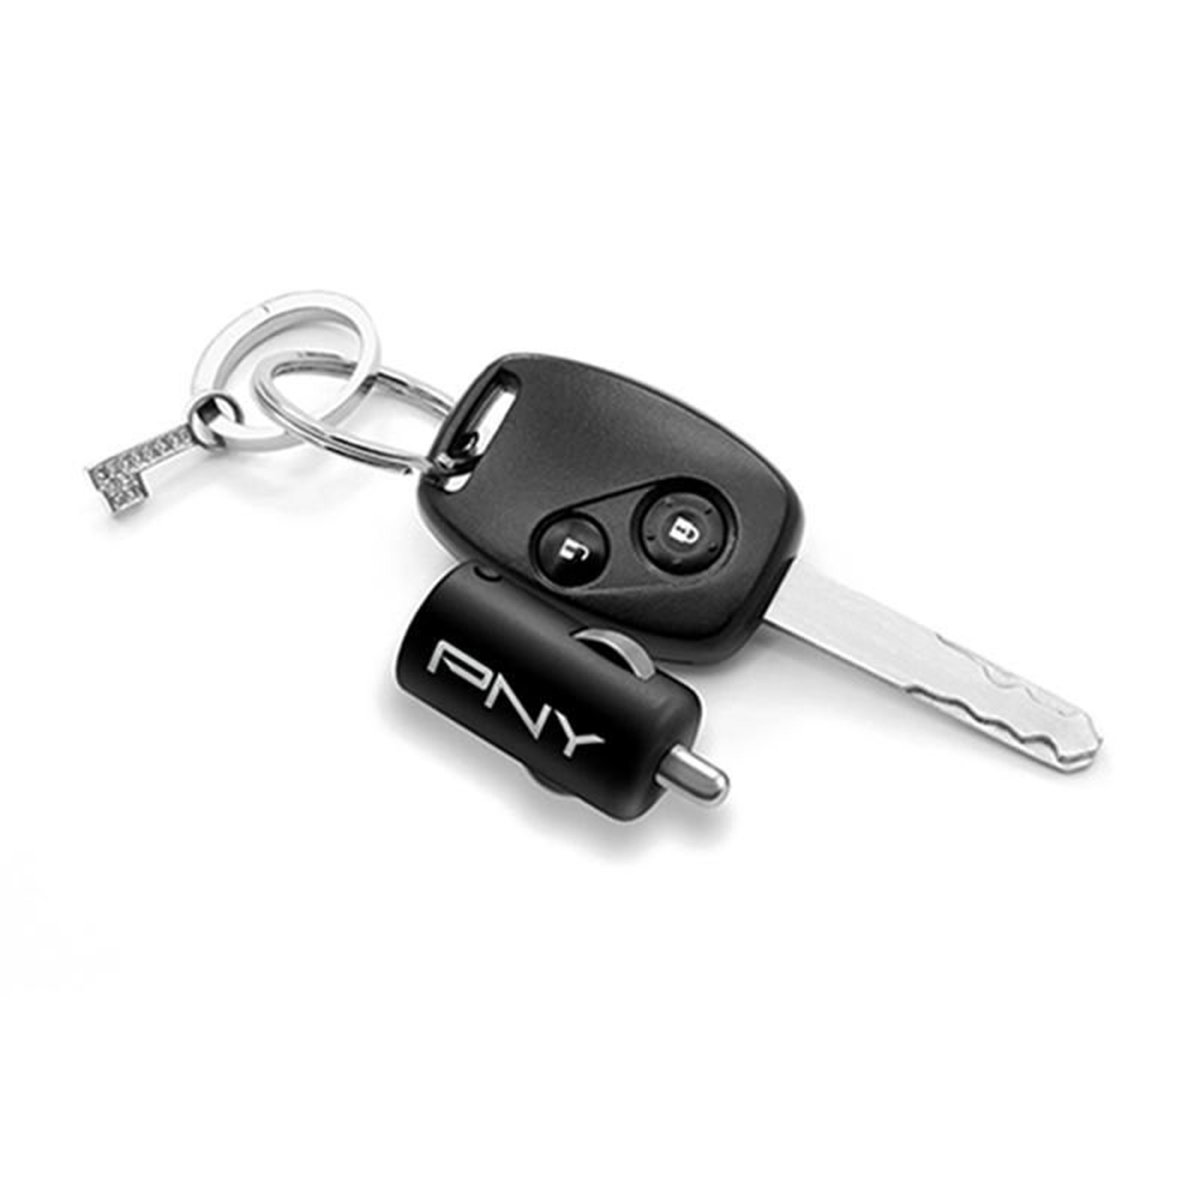 PNY Car Charger Black (EMBO0613US 2.4A)